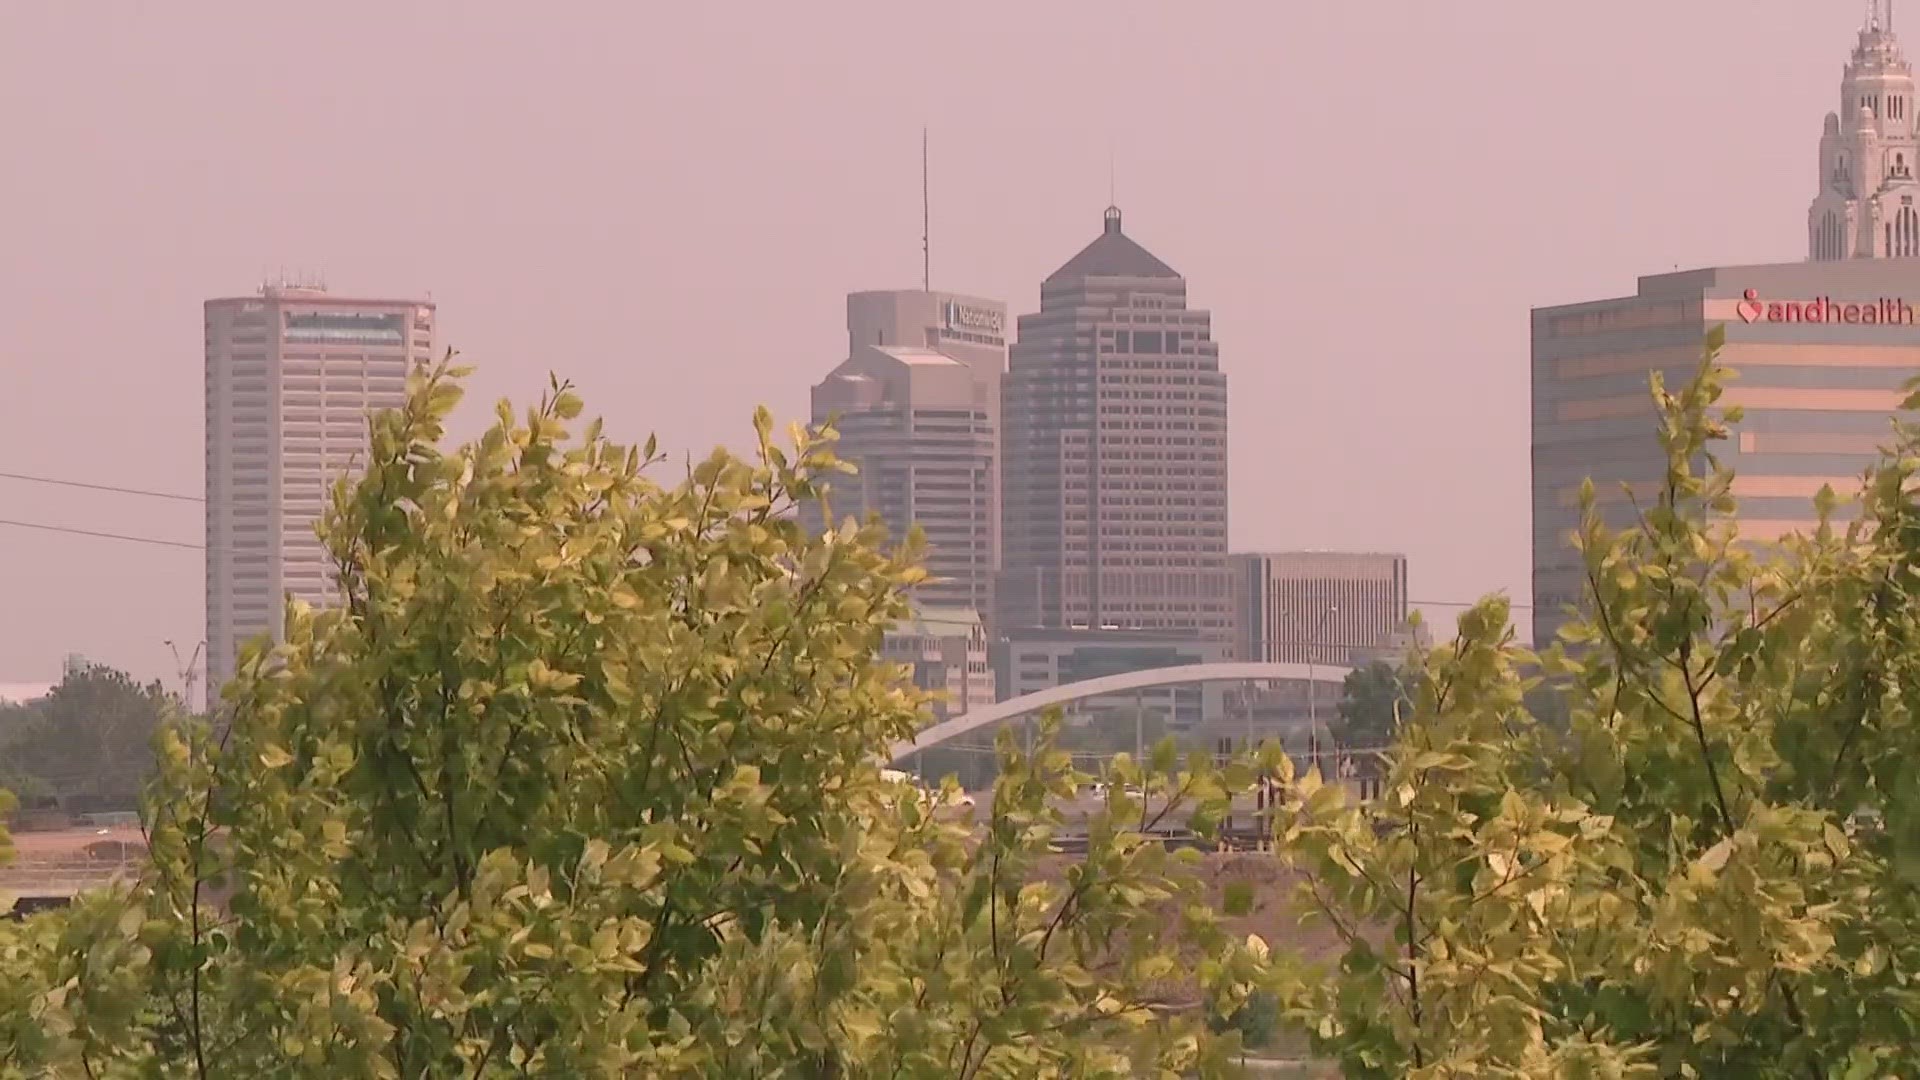 Doctors say young children and seniors are the most at risk for respiratory issues when the air quality is poor.